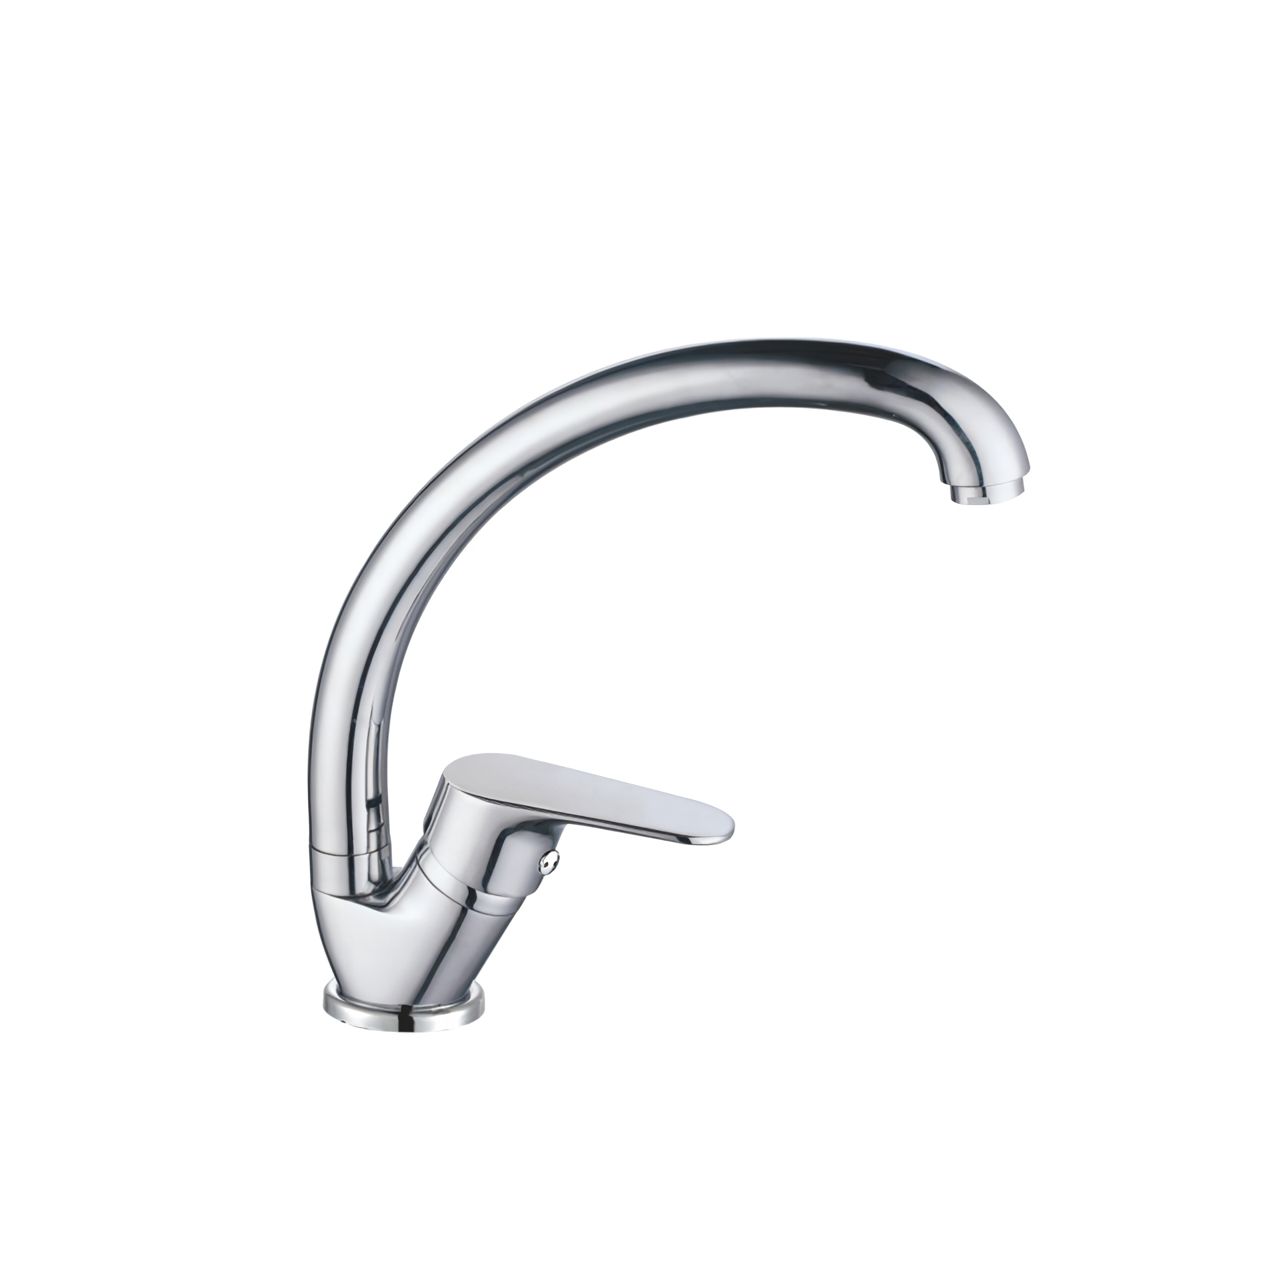 OJ-J2448H Hot and Cold Water Kitchen Faucet Single Hole Faucet Easy to Install and Smooth Water Outlet Zinc Alloy Kitchen Faucet